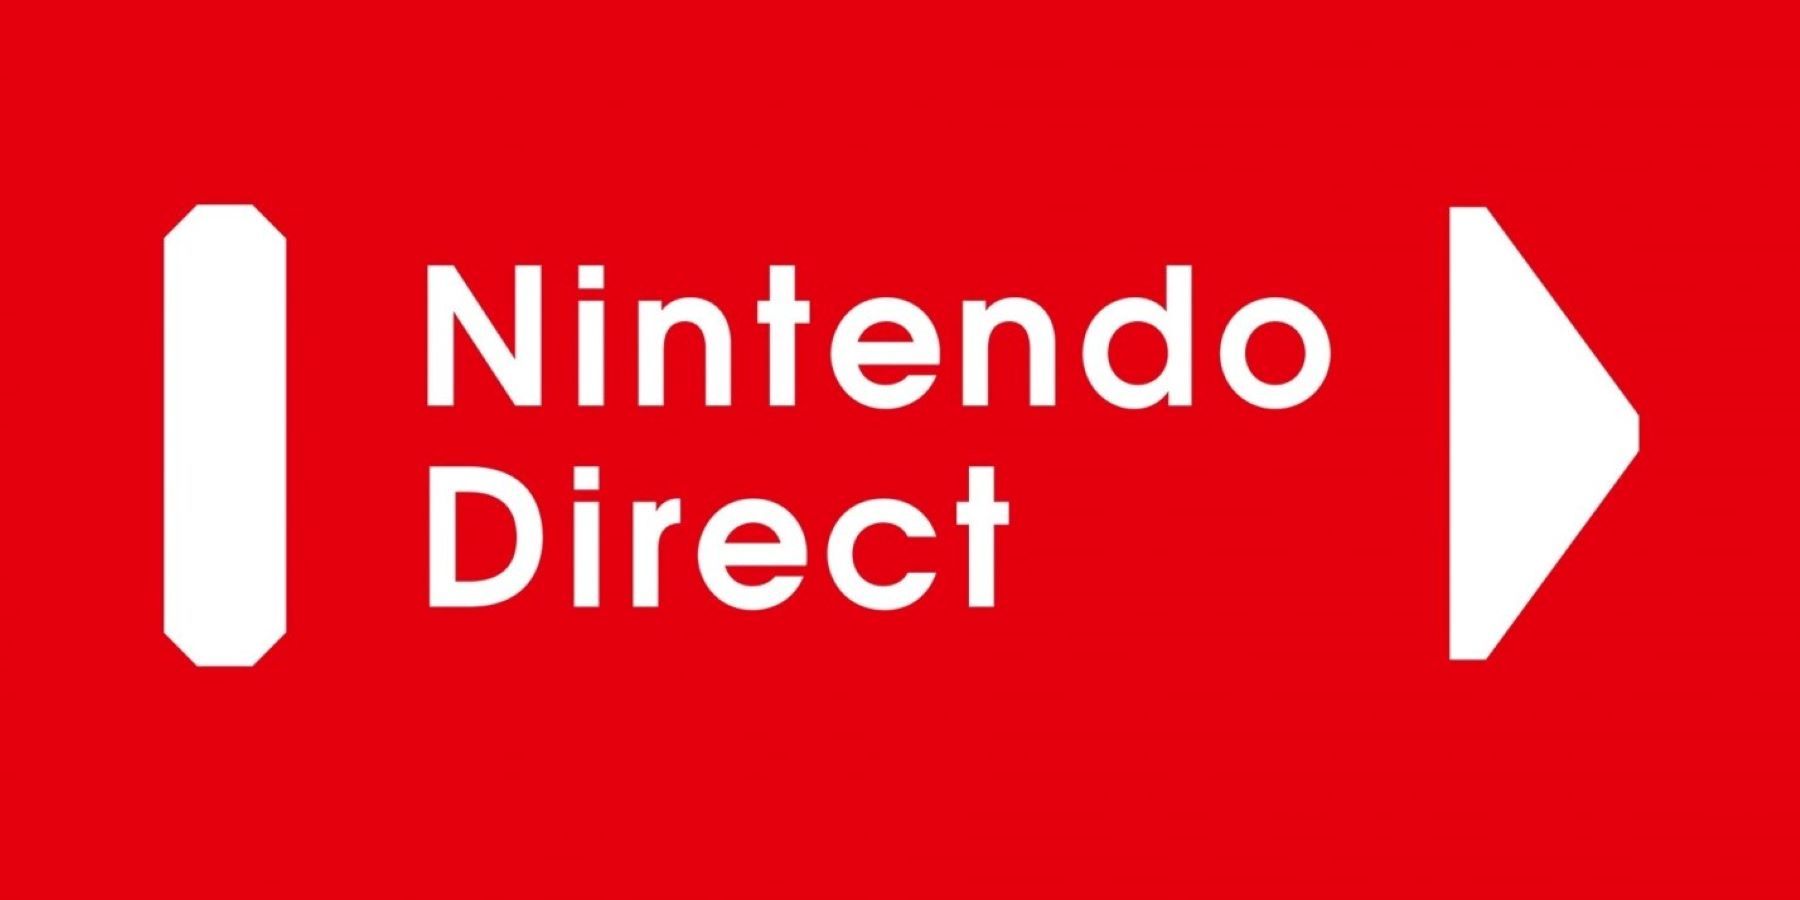 A Nintendo Direct logo on a red background